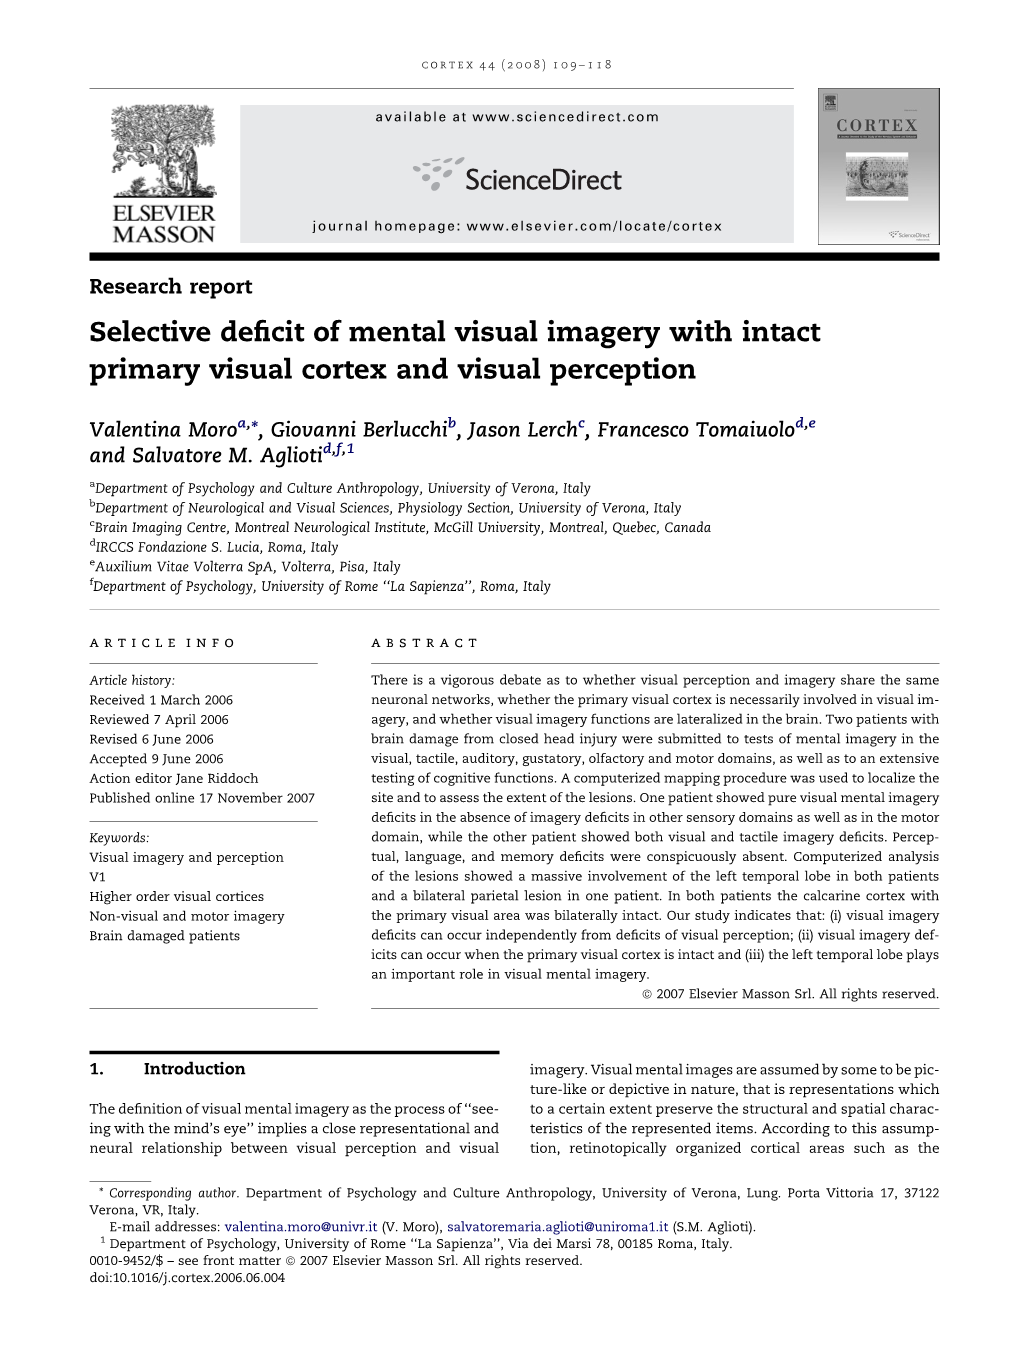 Selective Deficit of Mental Visual Imagery with Intact Primary Visual